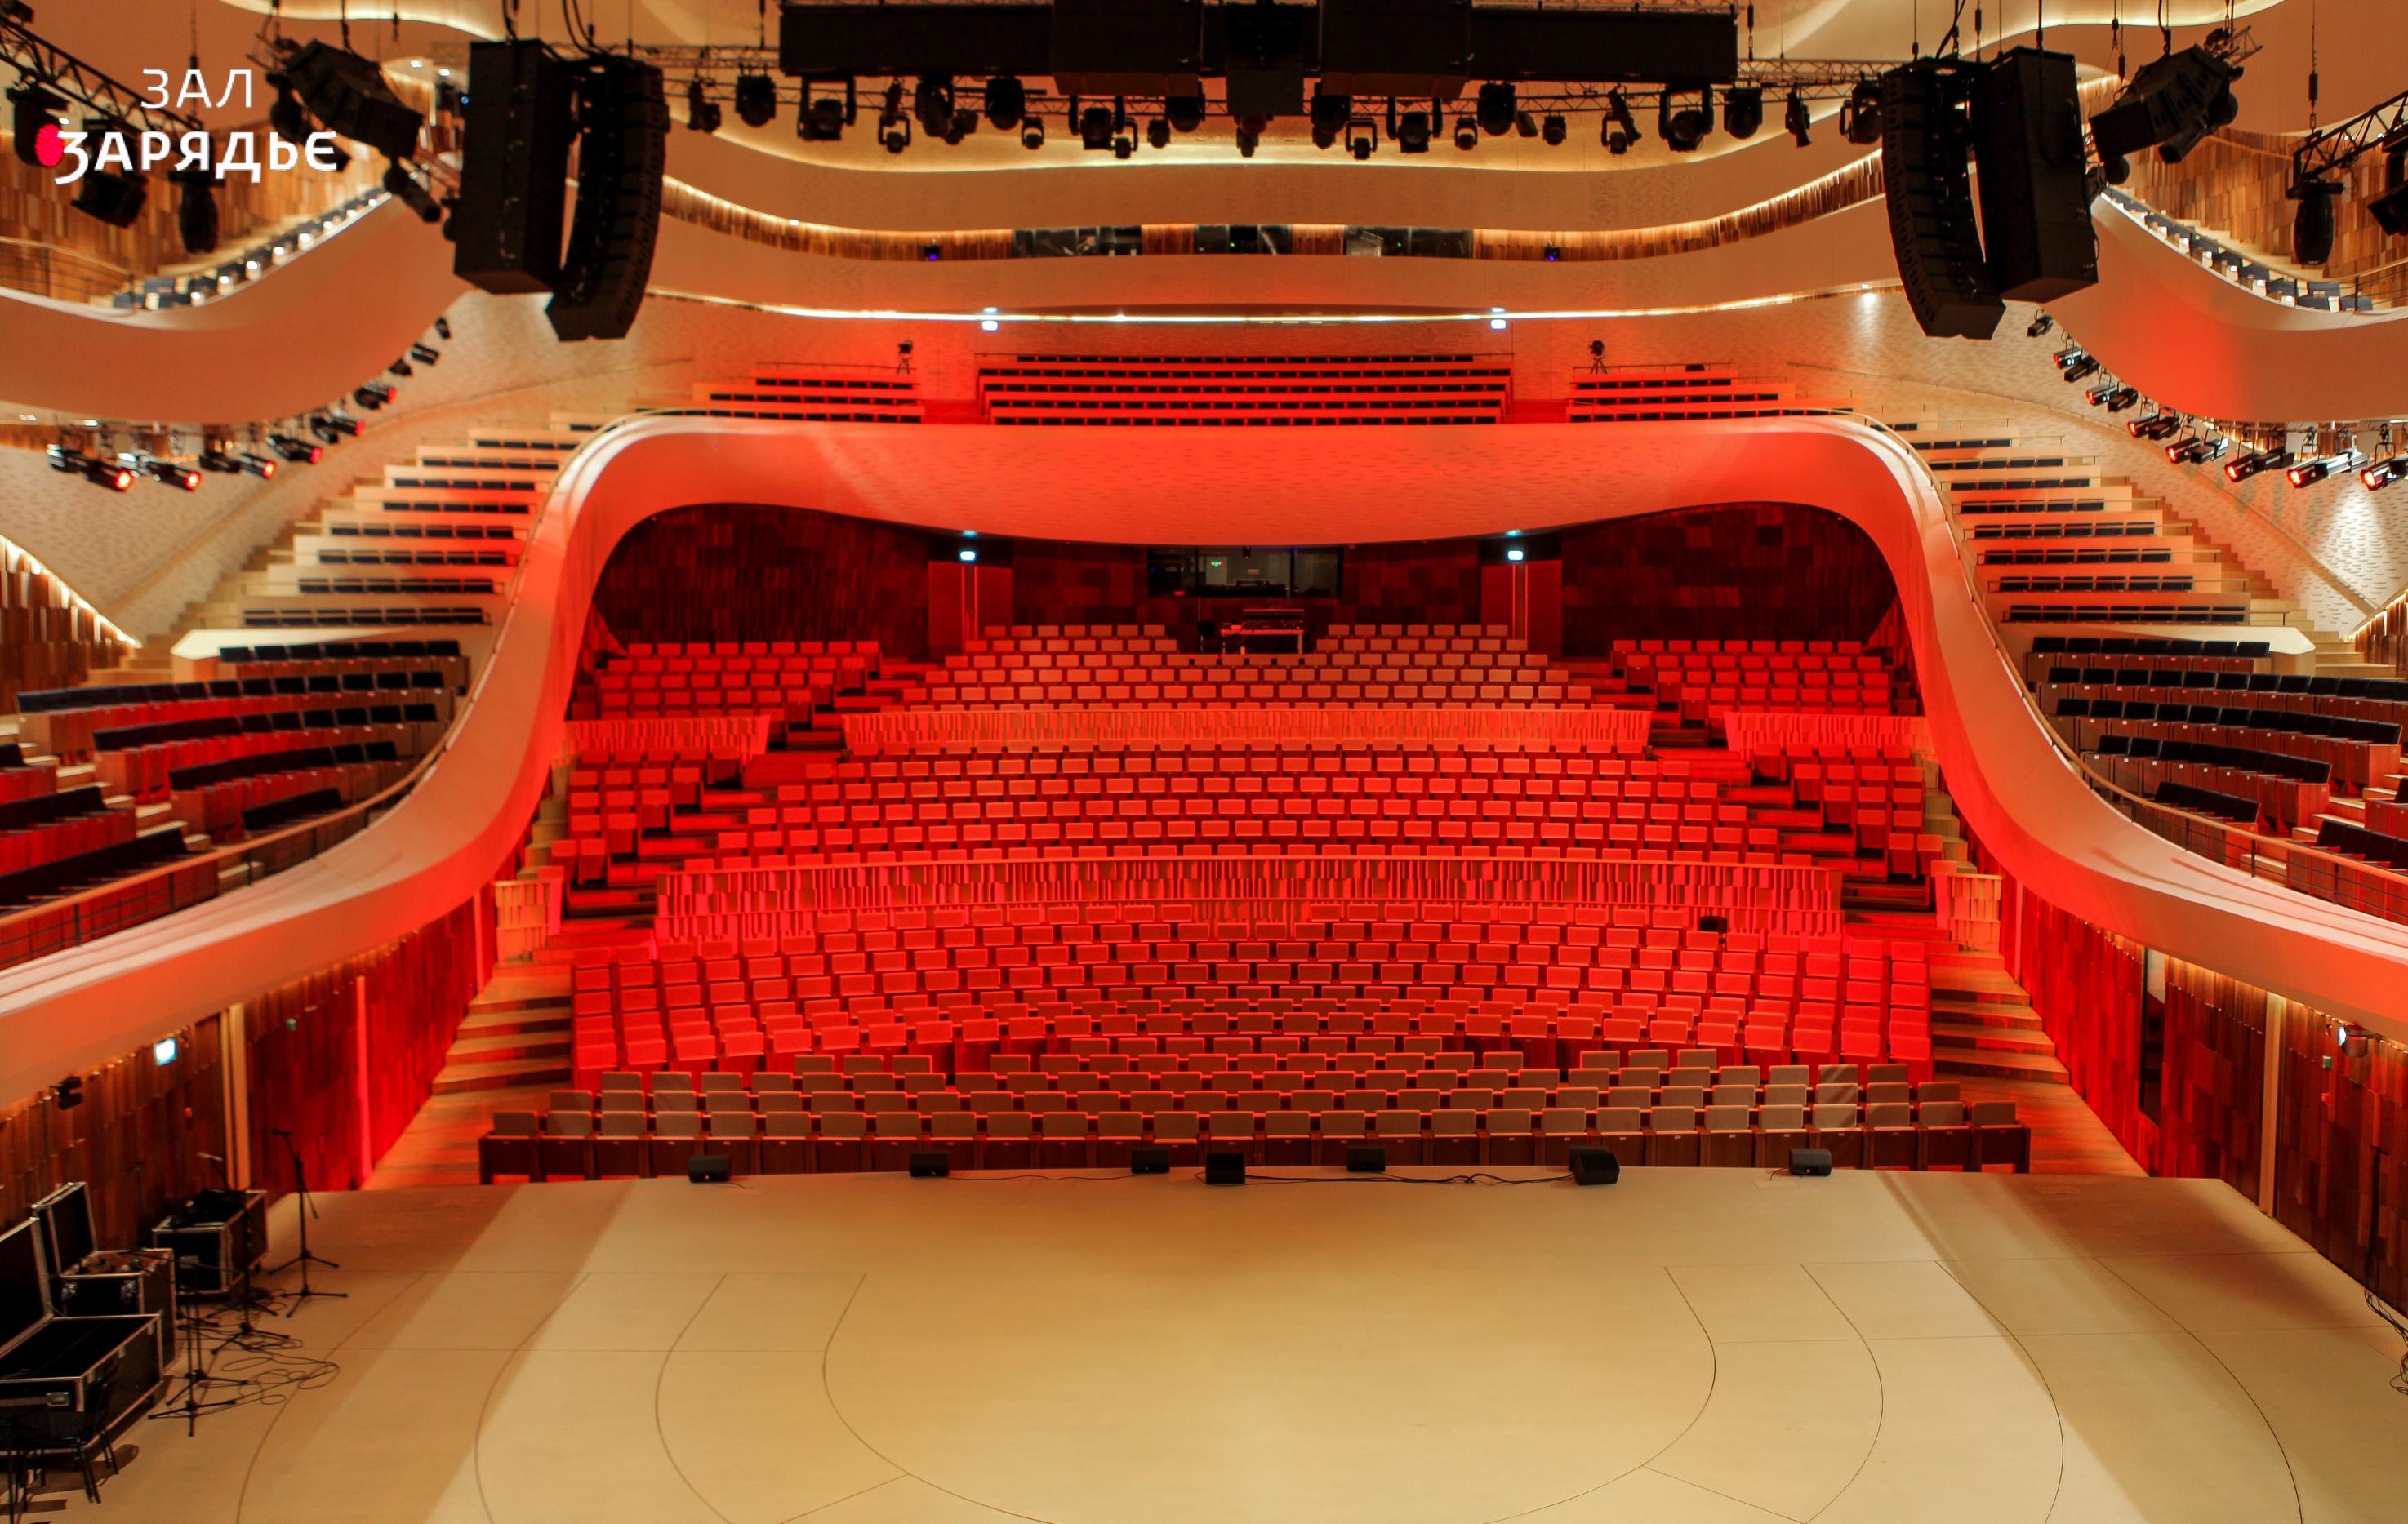 Sightseeing concert hall tour